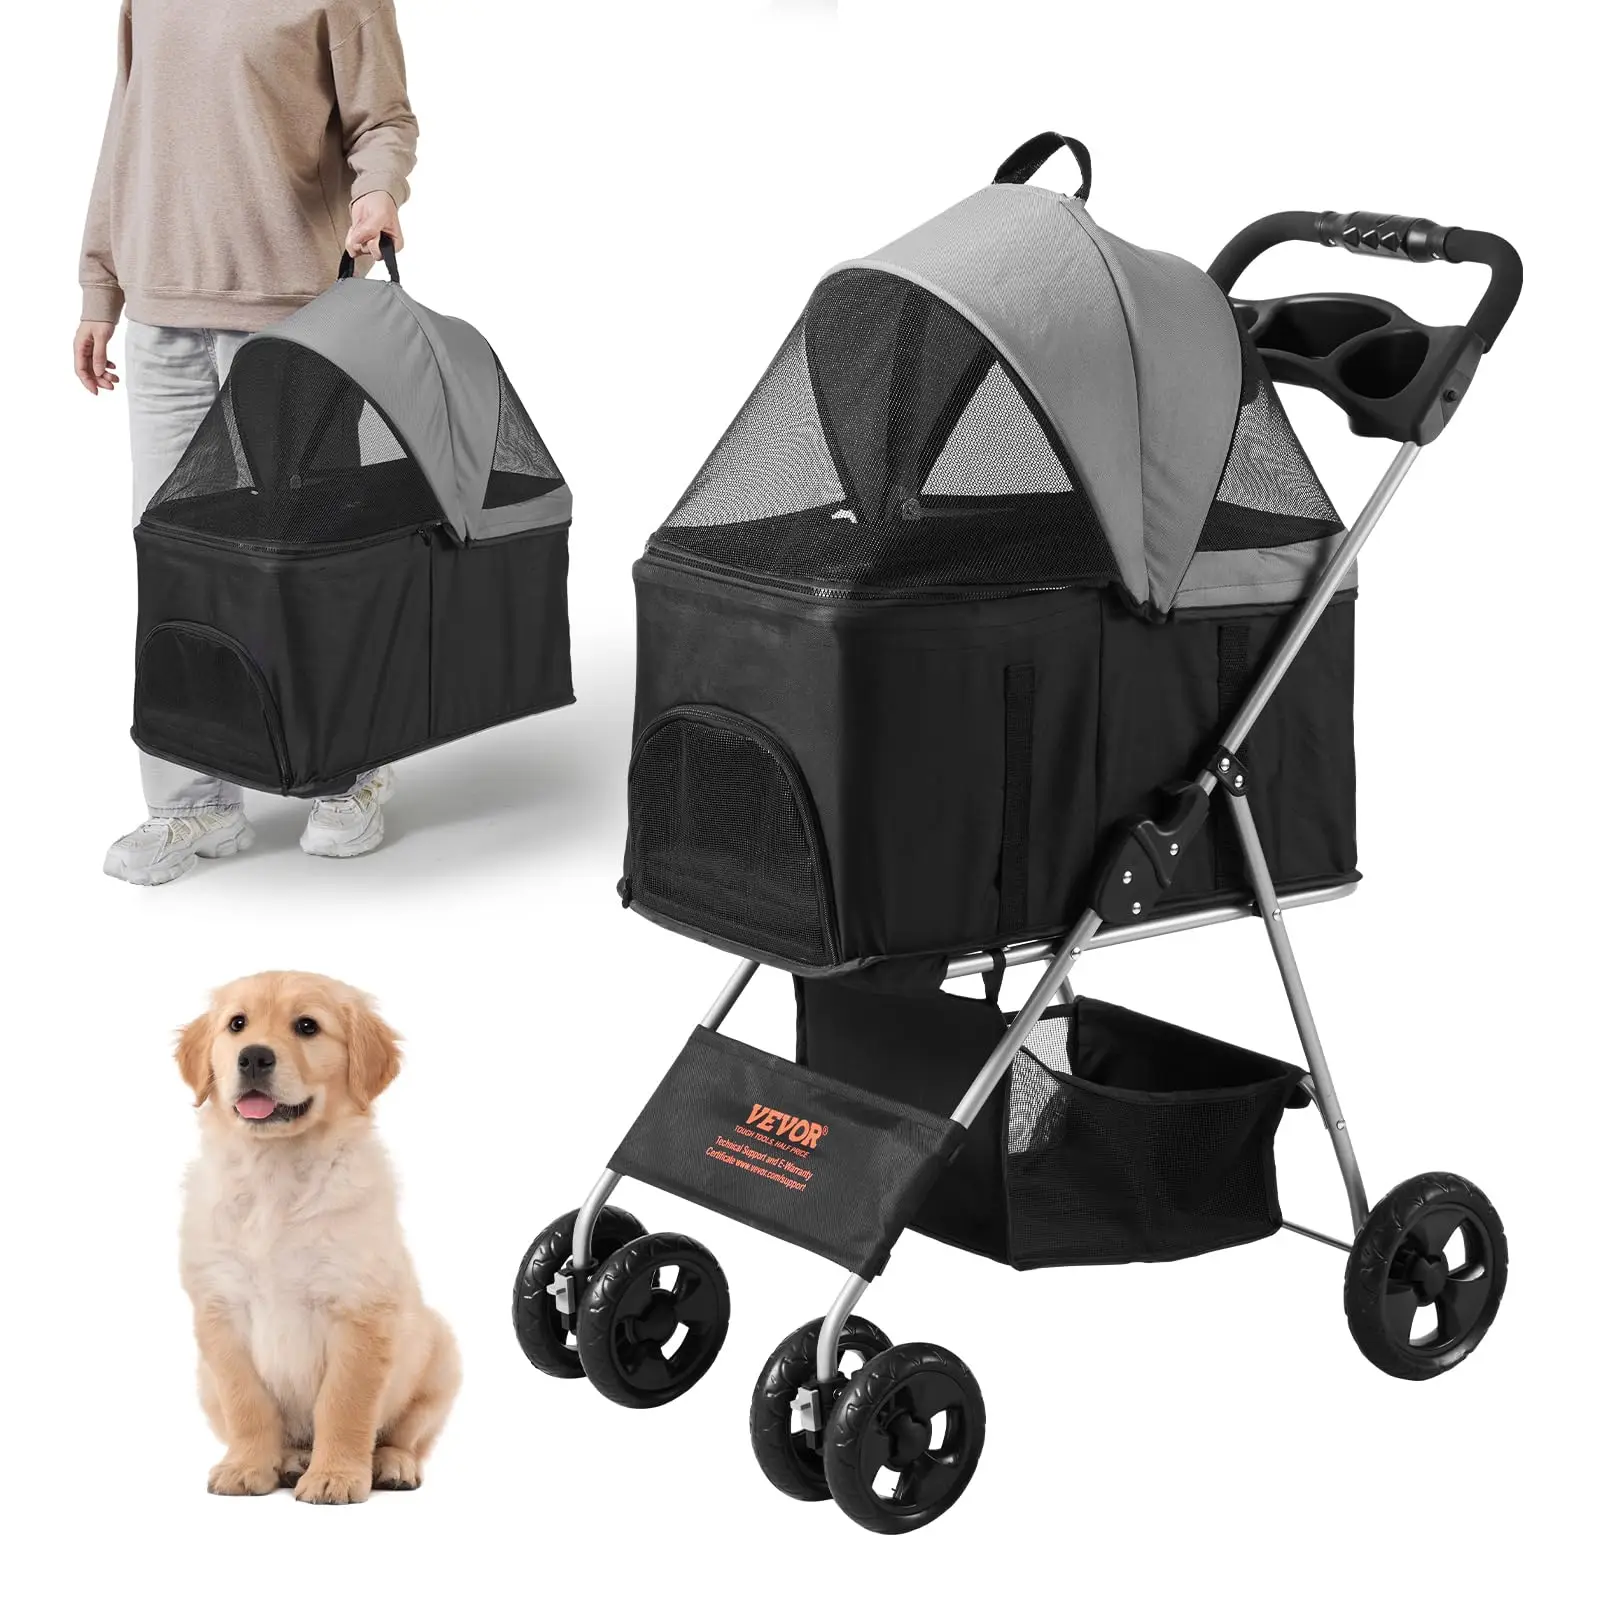 

3 in 1 Dog Stroller For Medium Small Dogs Up to 35lbs, 4 Wheels Folding Pet Stroller For Dogs Cats With Detachable Carrier